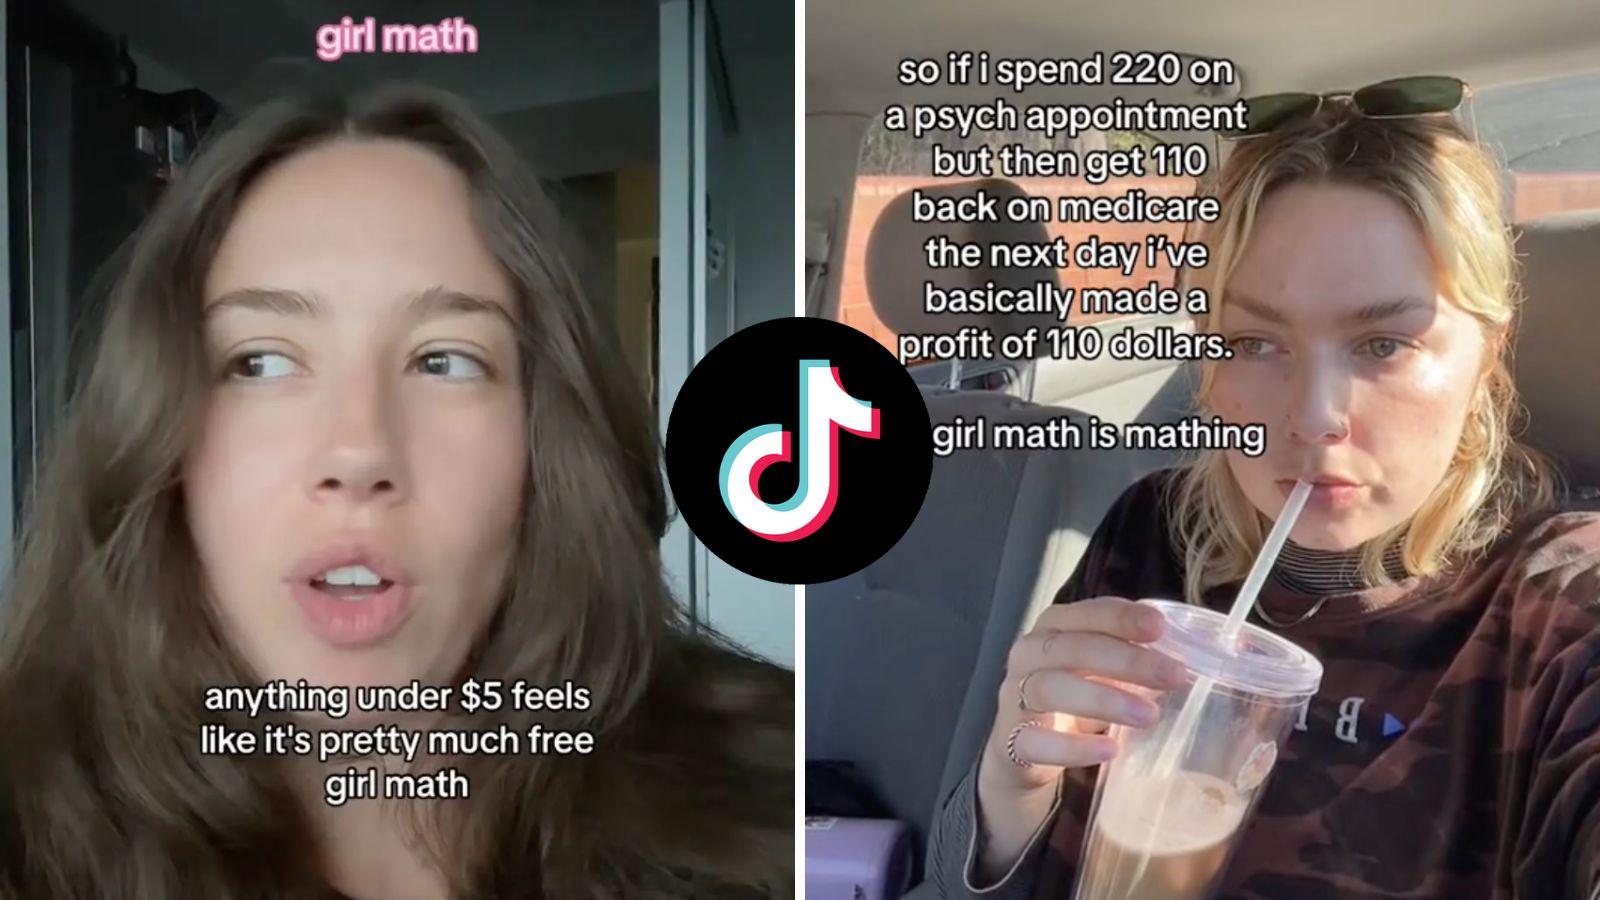 Screenshots from TikTok videos related to the girl math trend